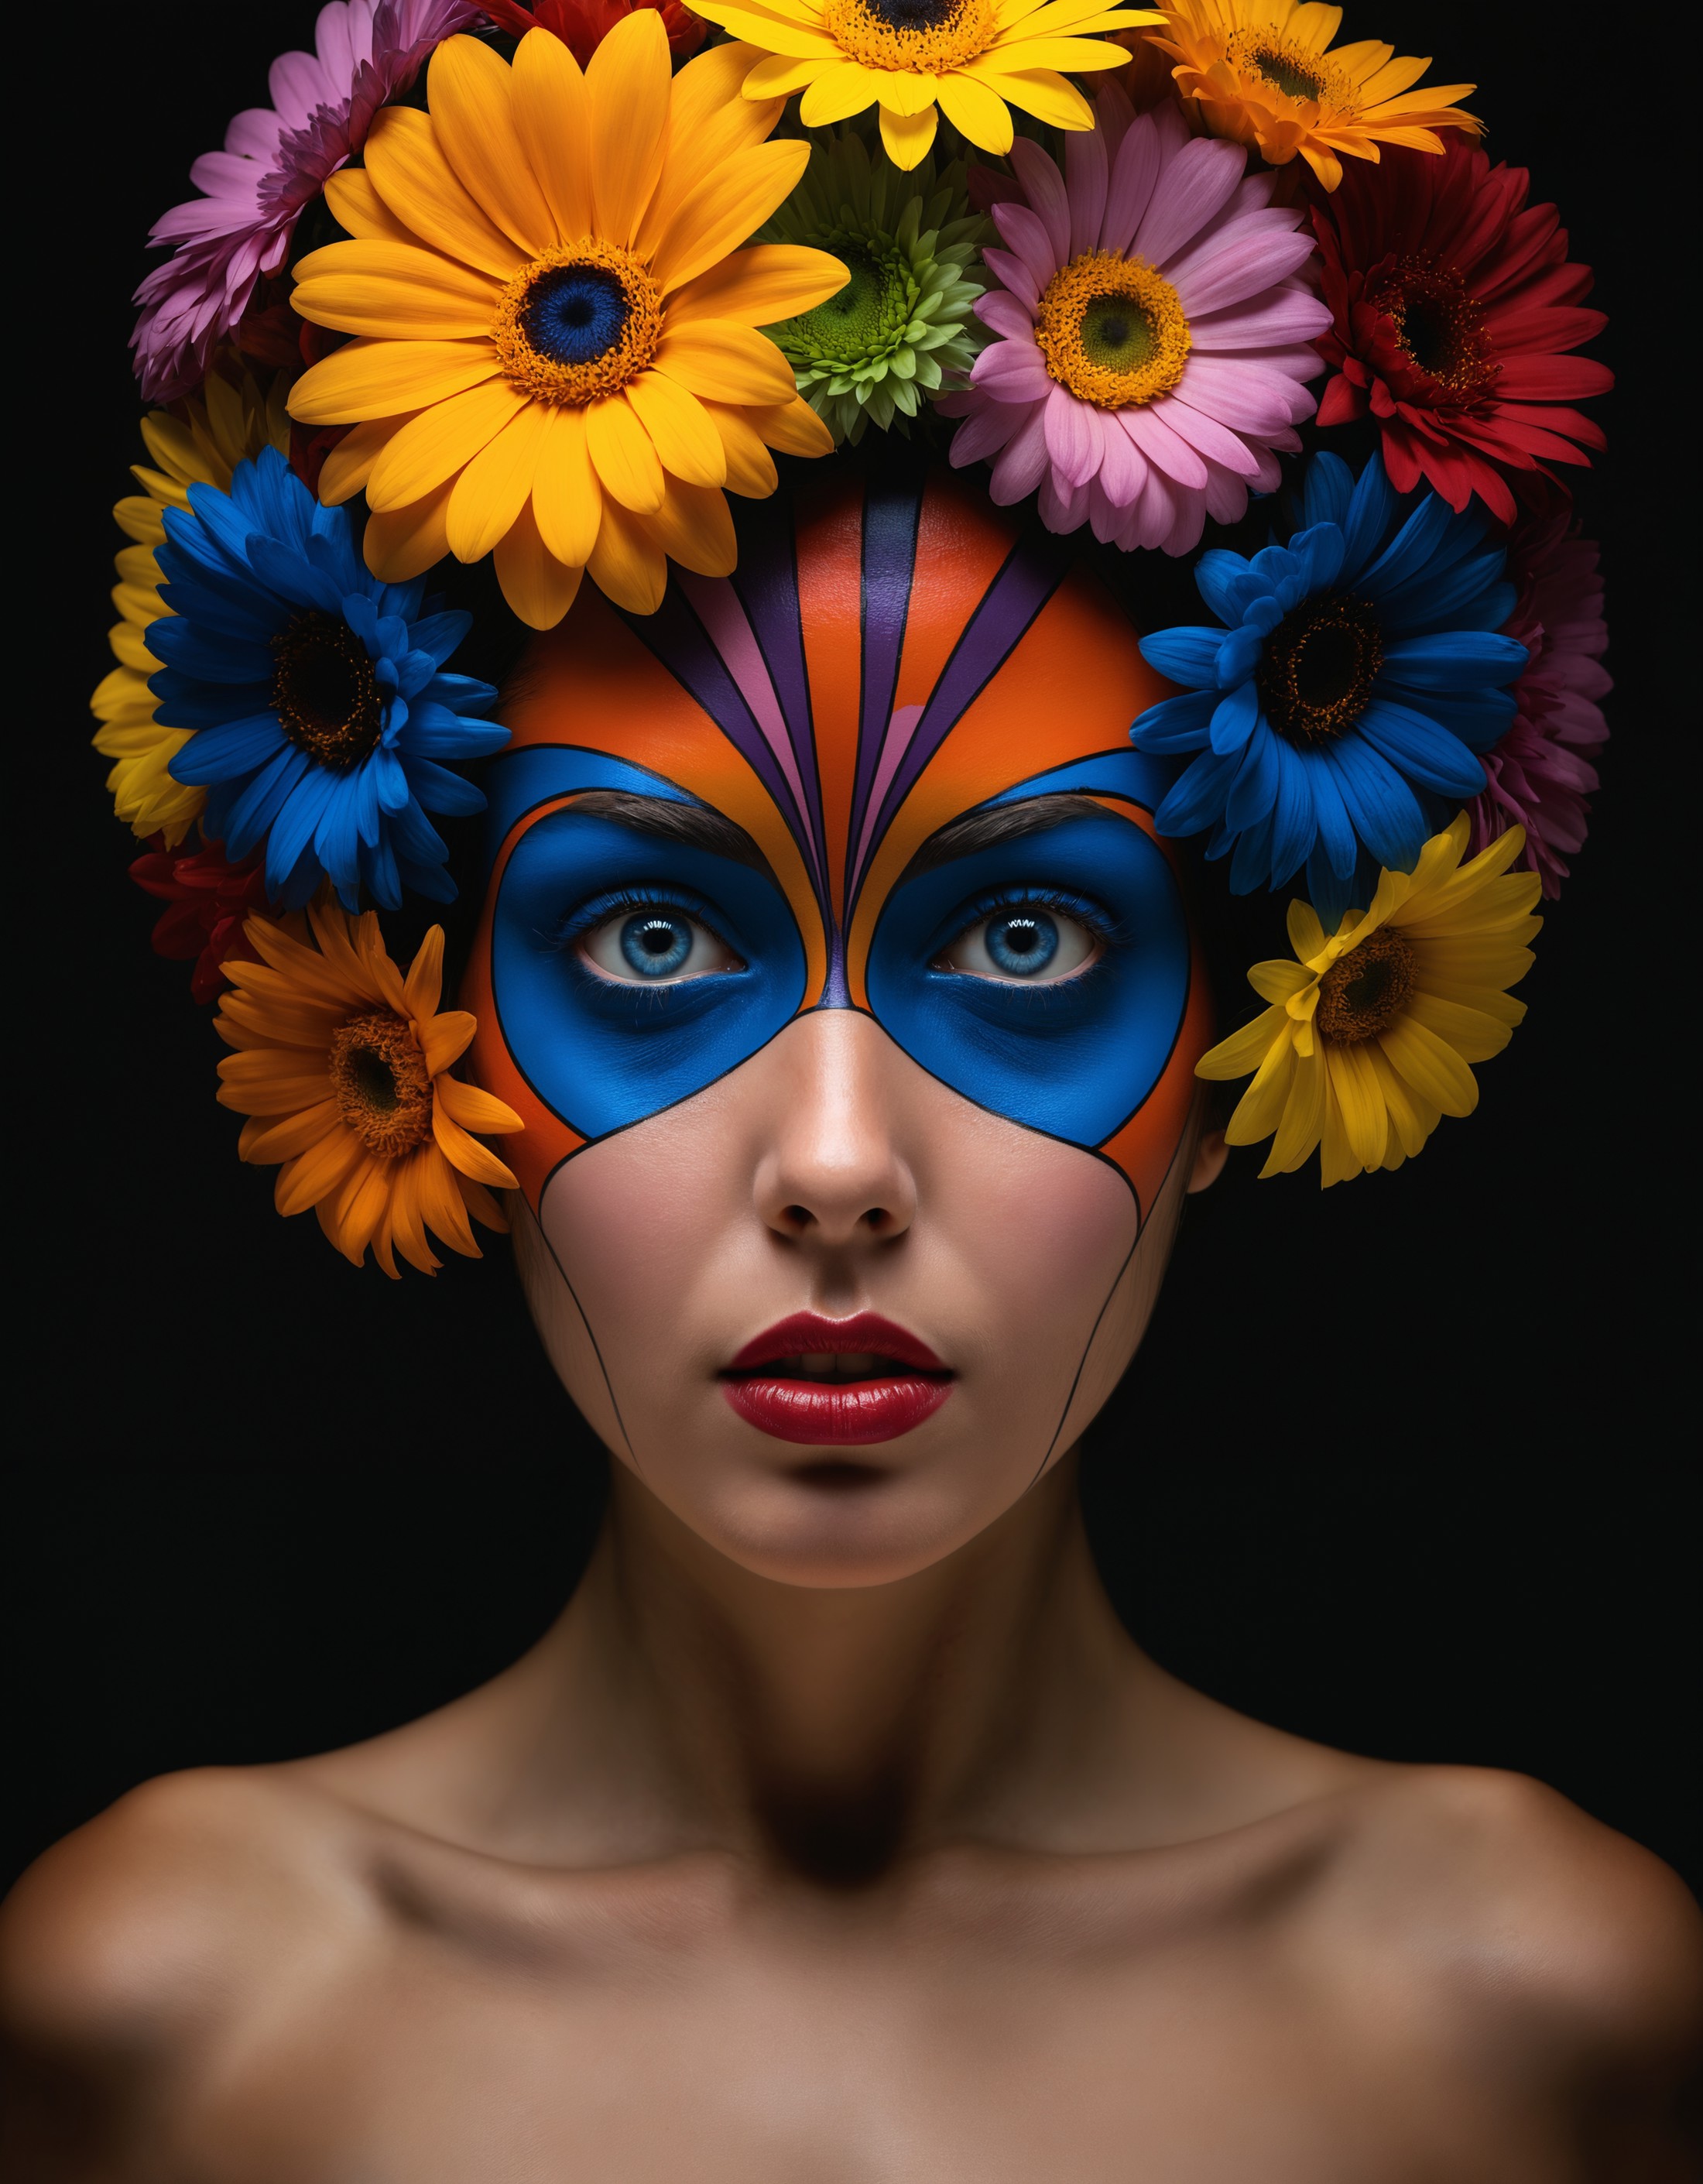 award winning photograph of a mysterious woman with a flower in her head,, amazing depth, masterwork, surreal, geometric p...